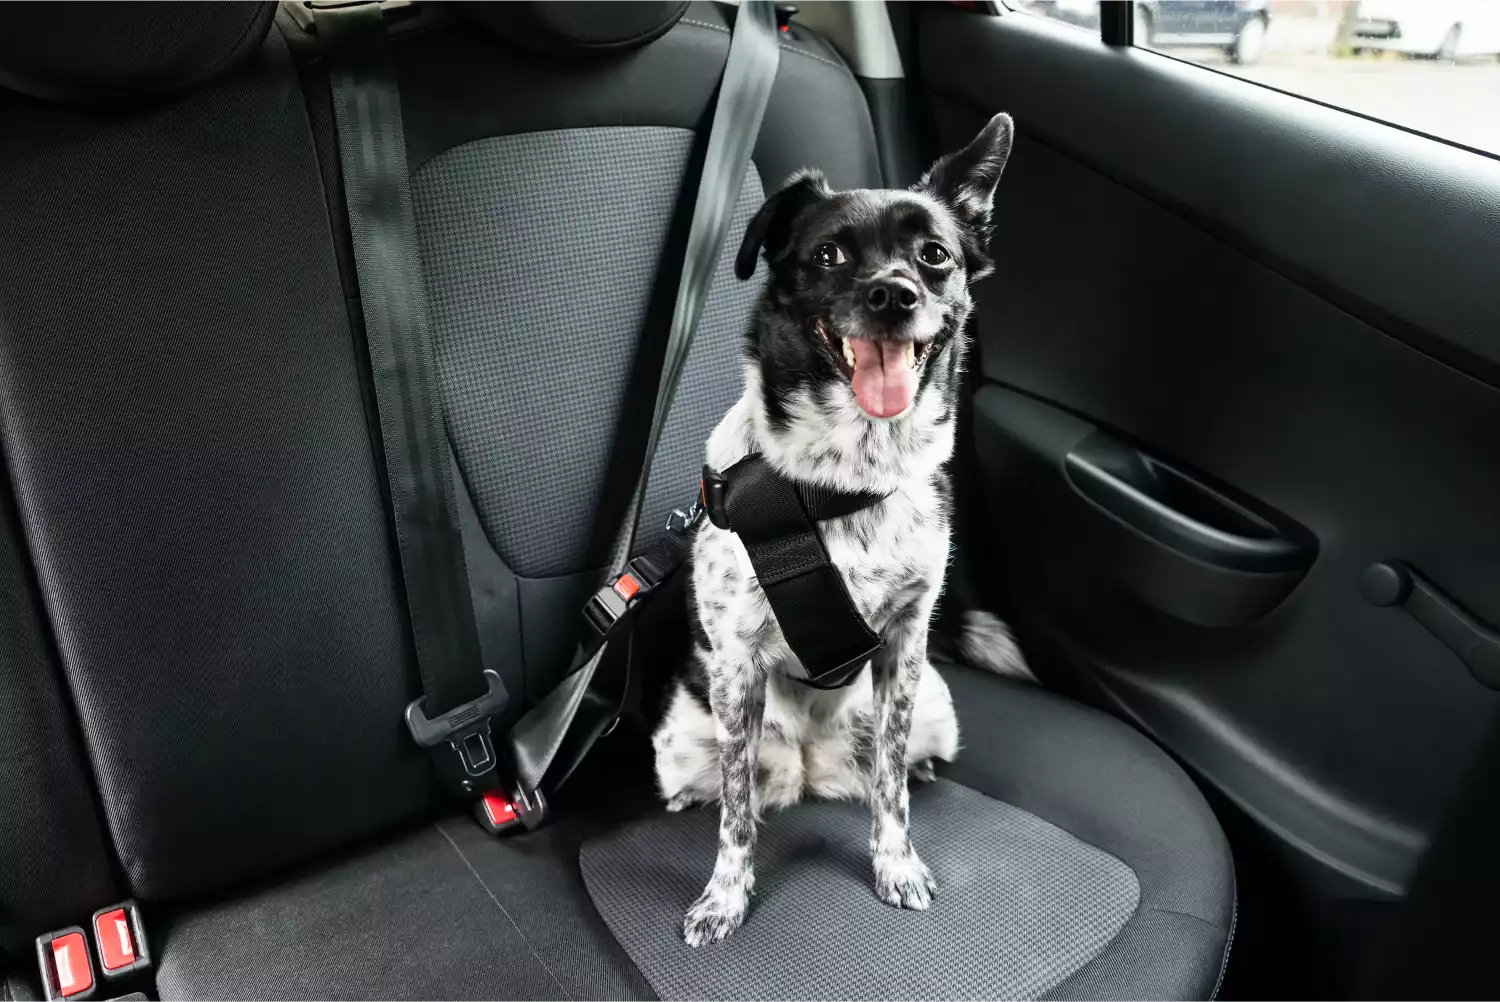 Toyota Camry Dog Safety Belt for Old English Sheepdogs